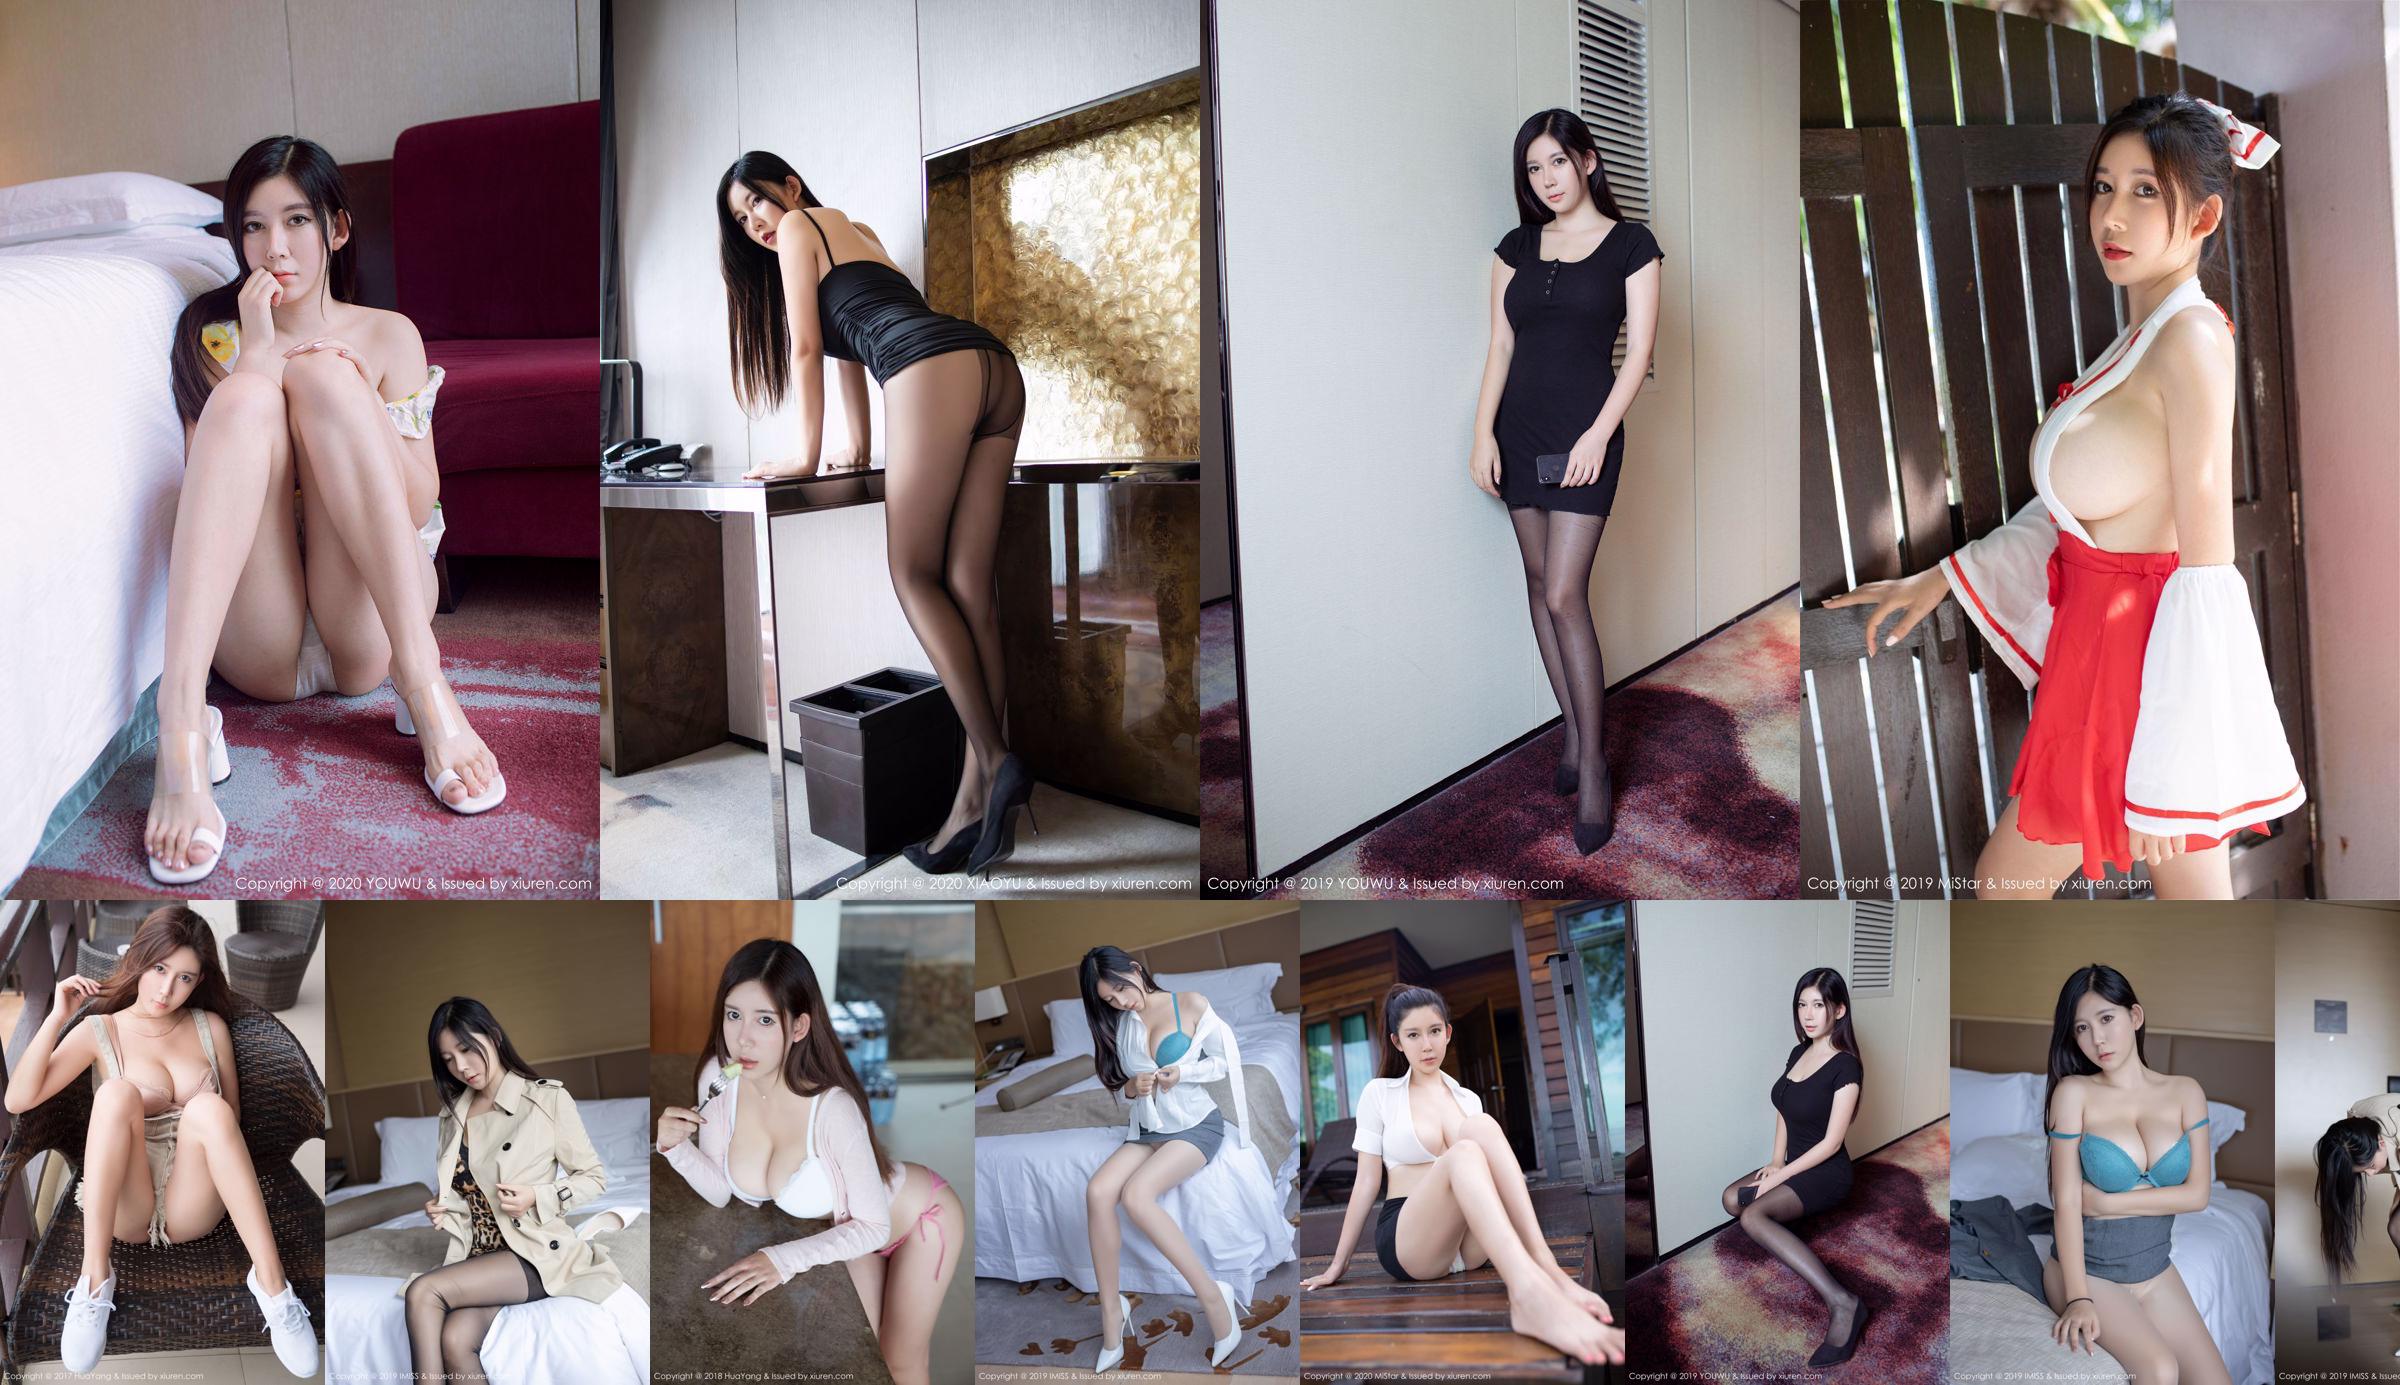 Abby Li Ya "Wonderful Scale Temptation at the End of the Year" [花扬HuaYang] Vol.021 No.5e2f14 Page 1